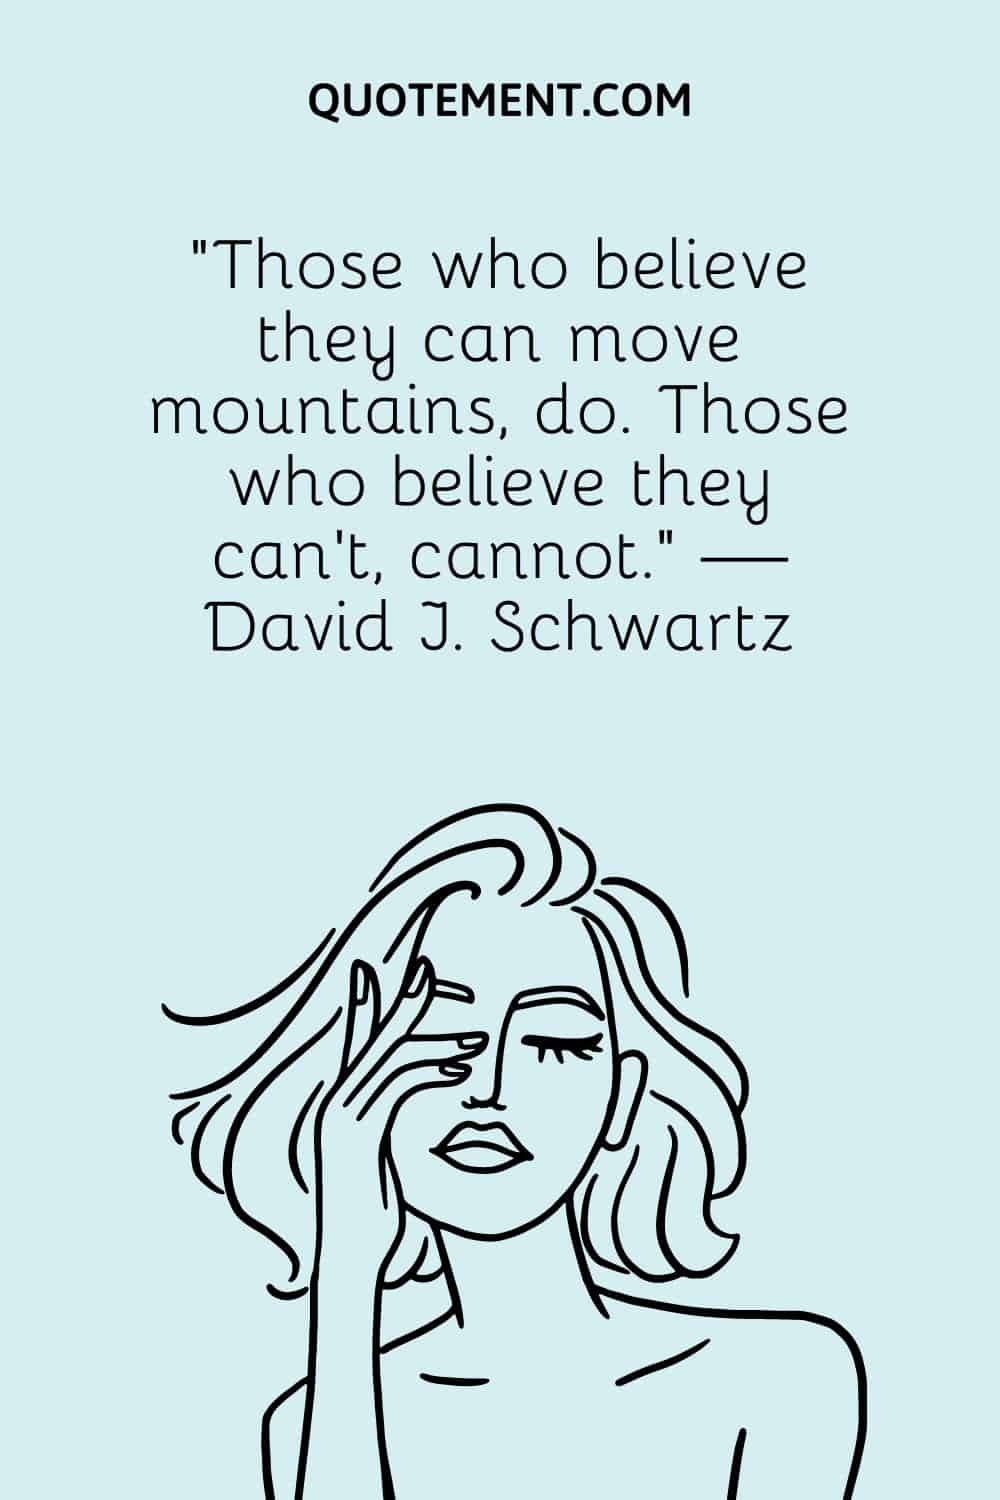 Those who believe they can move mountains, do. Those who believe they can't, cannot